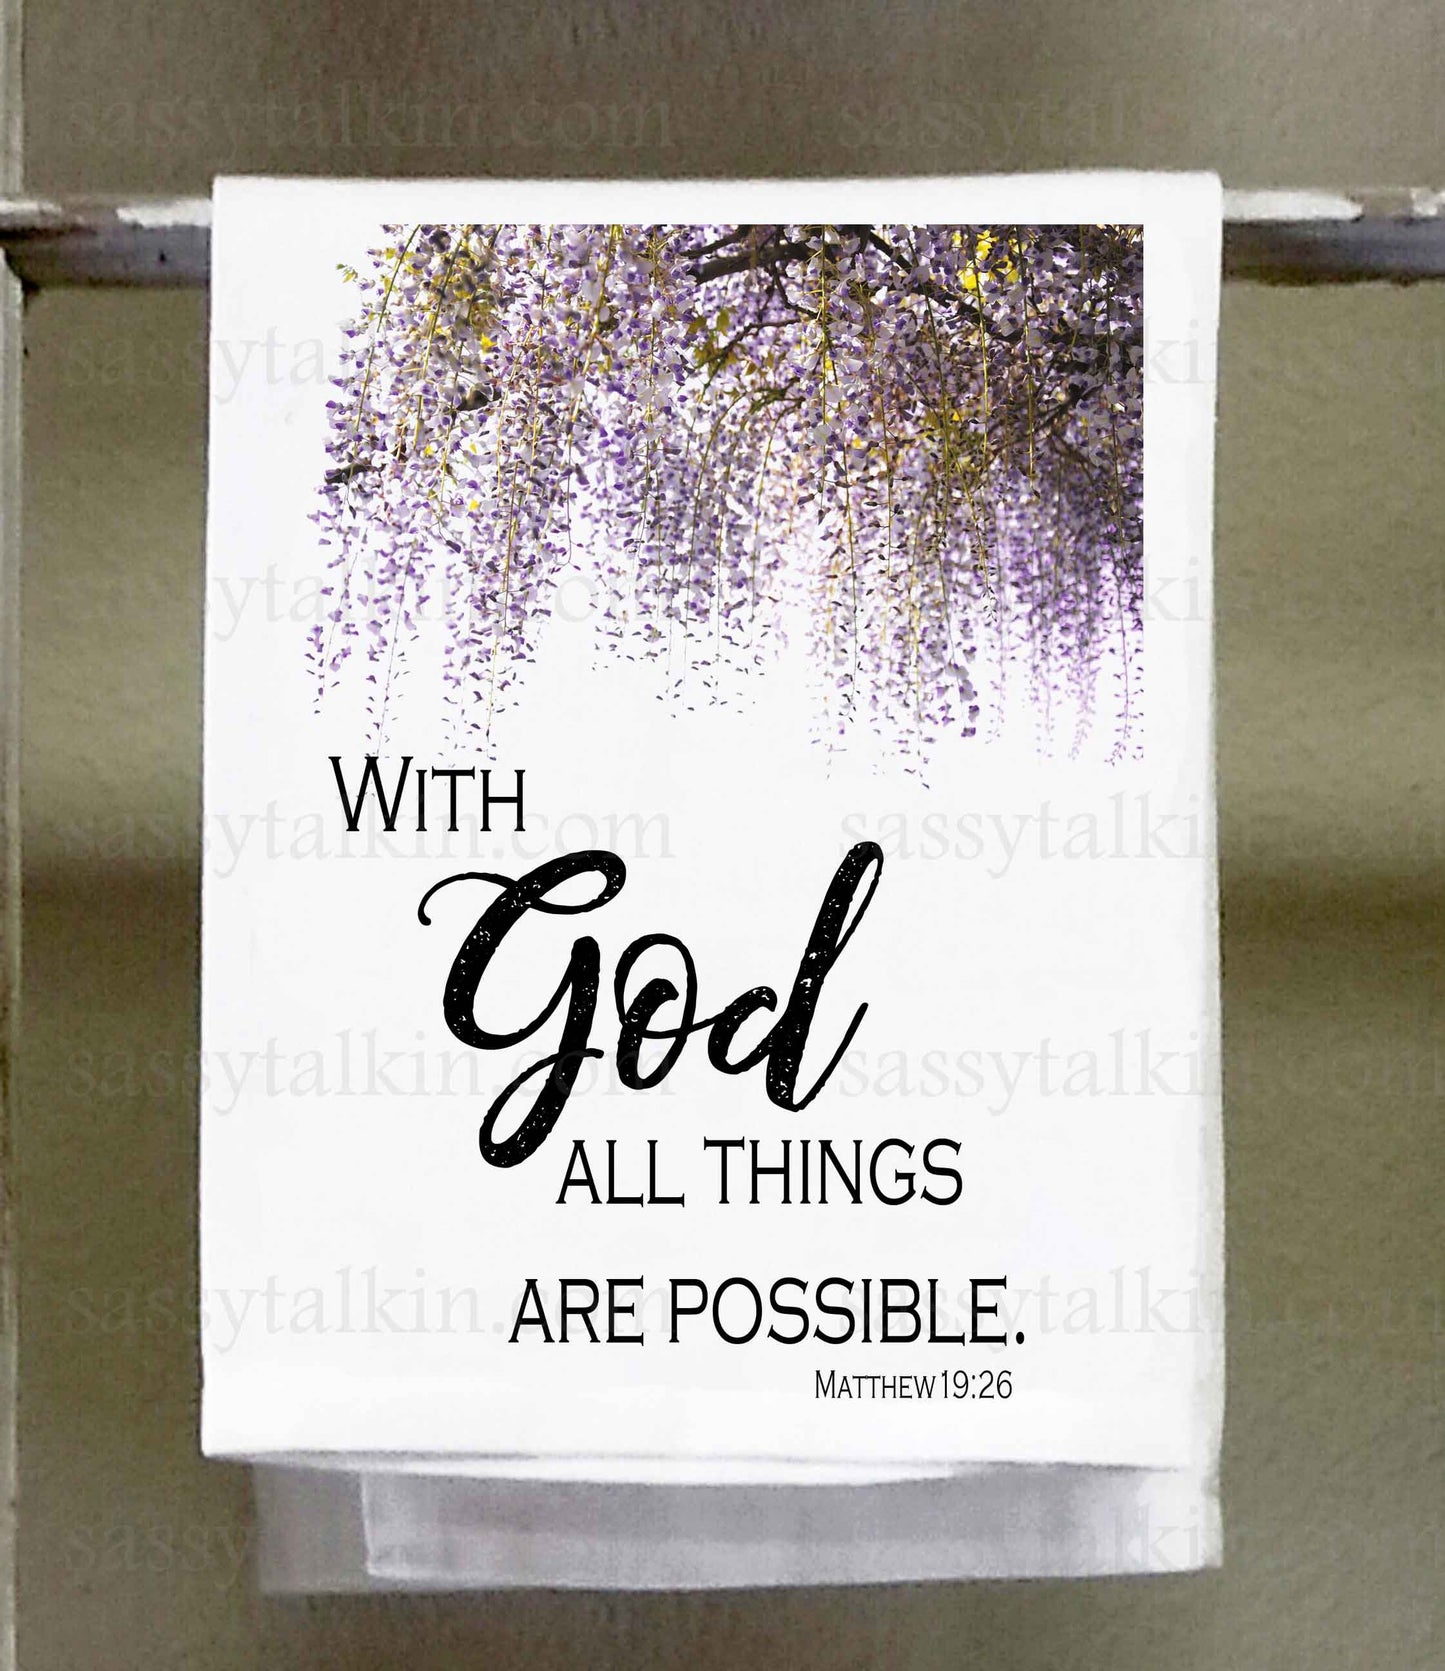 Inspirational Dish Towel, "With God all things are possible", wisteria